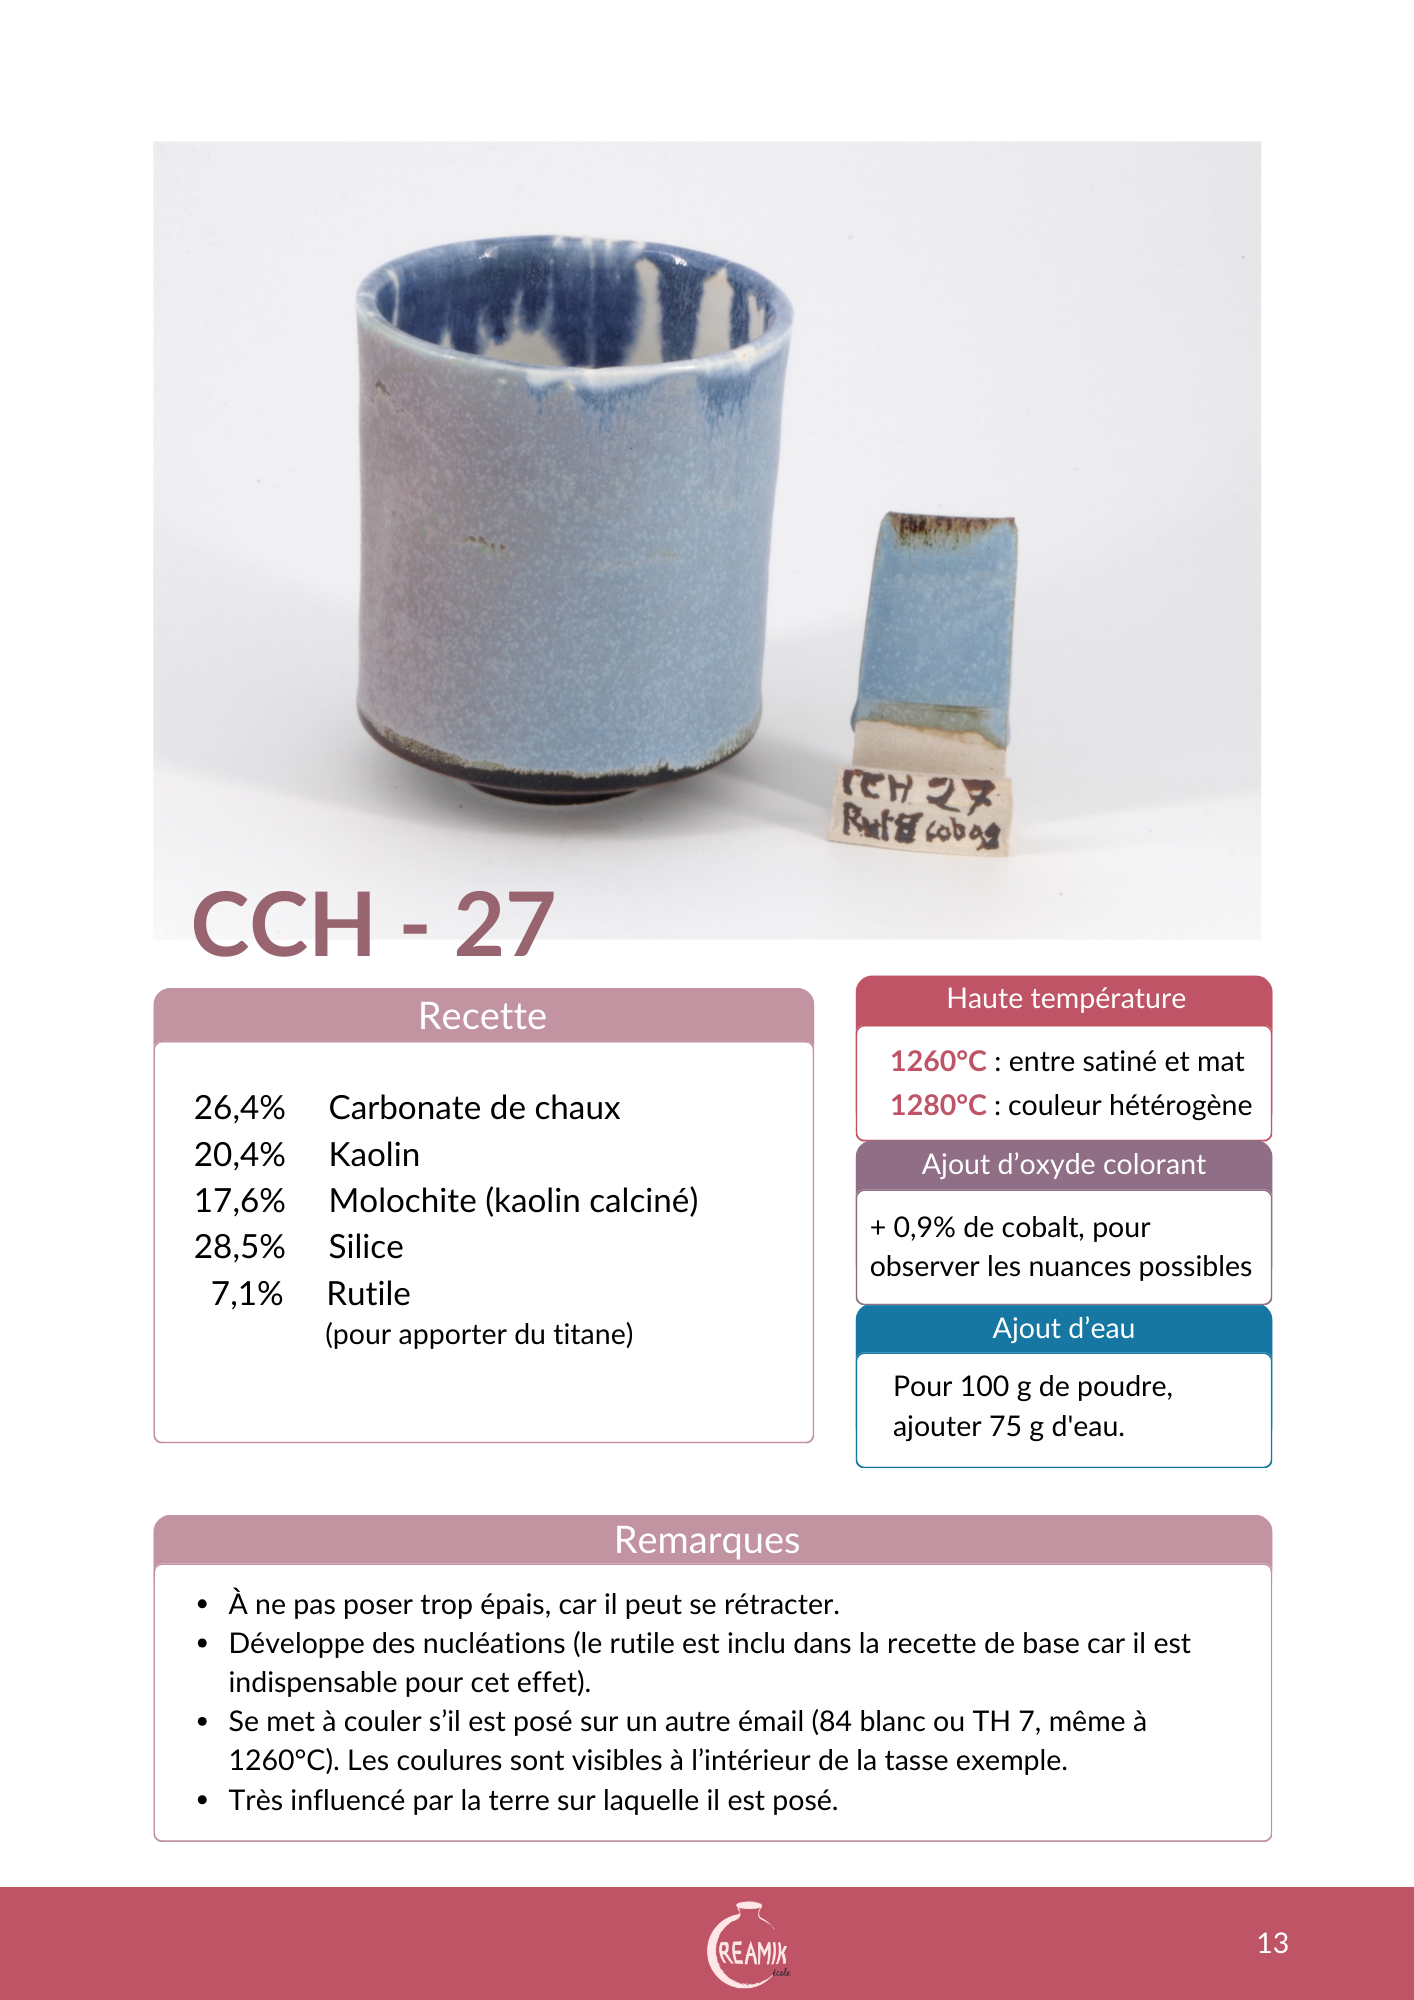 CCH-27 Recette email Creamik